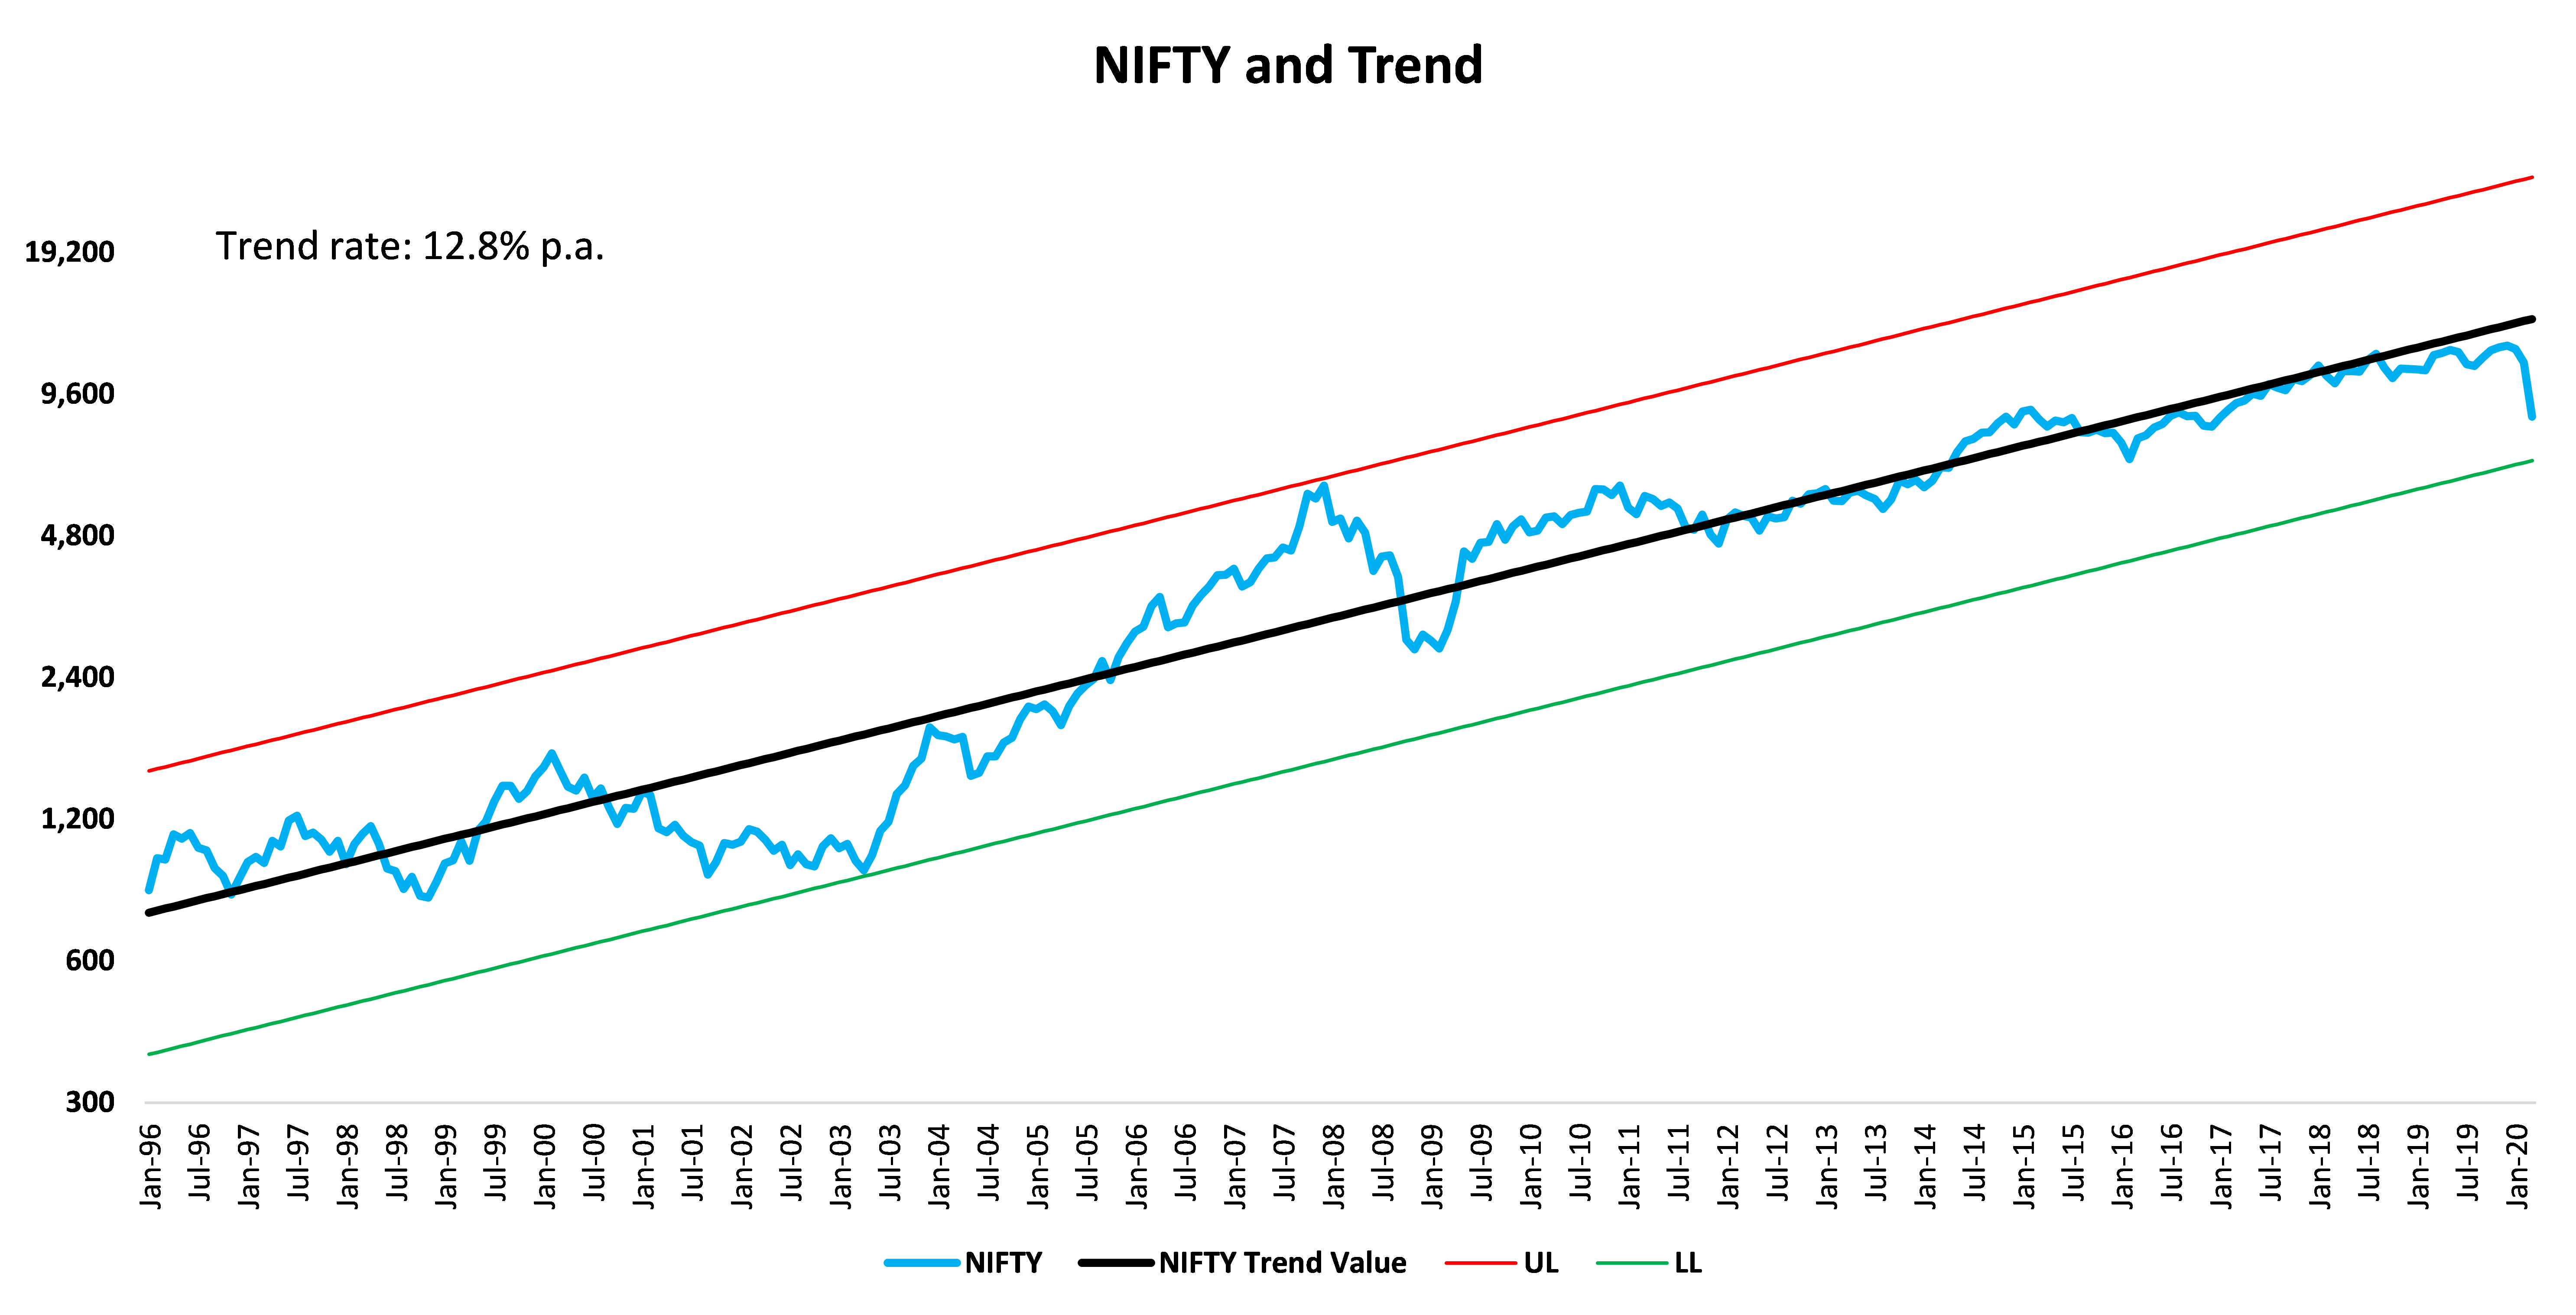 NIFTY 50 Index